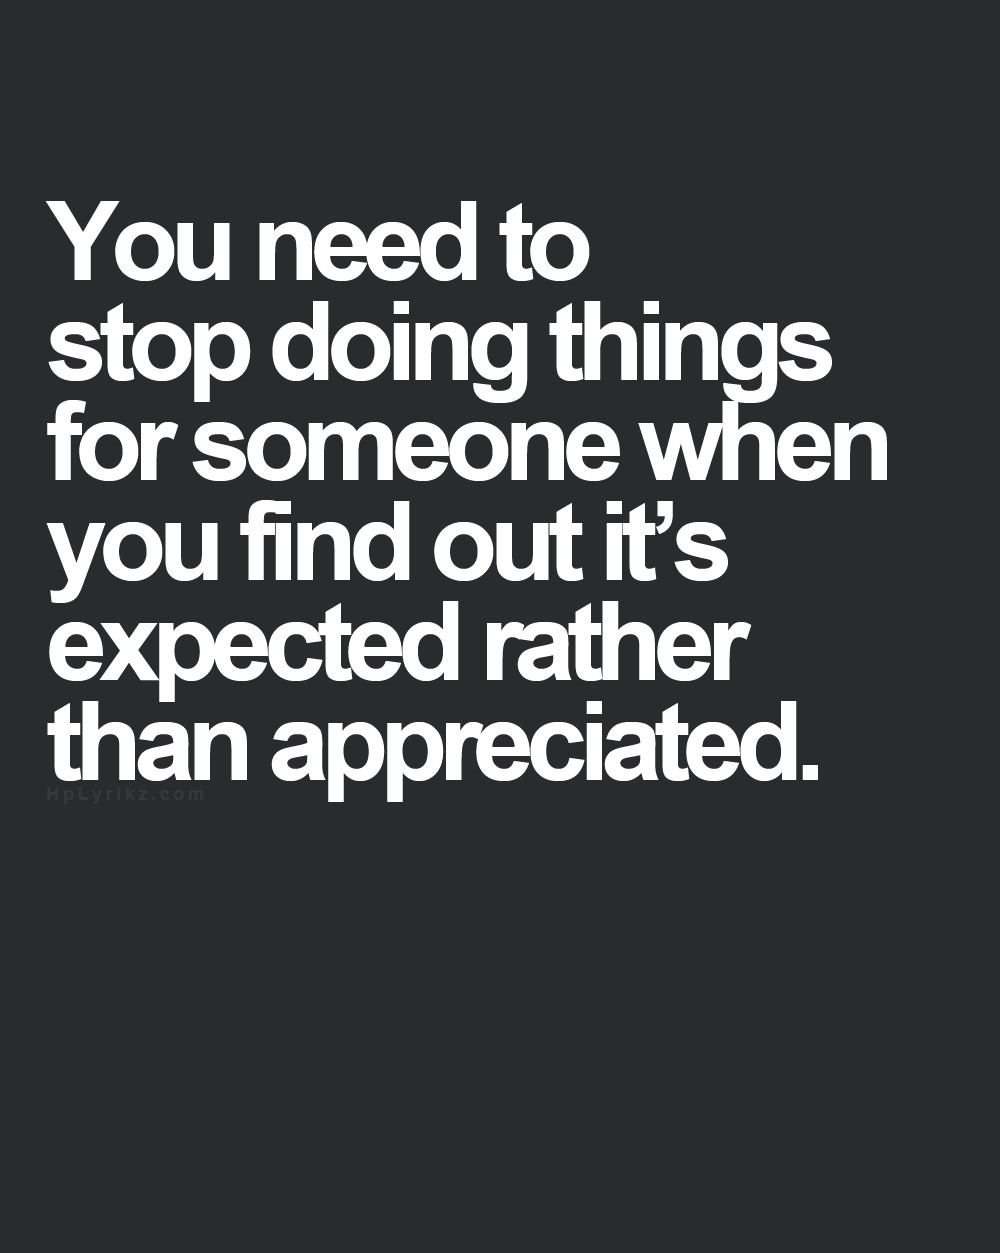 Quotes About Not Being Appreciated In A Relationship
 The 25 best Love appreciation quotes ideas on Pinterest